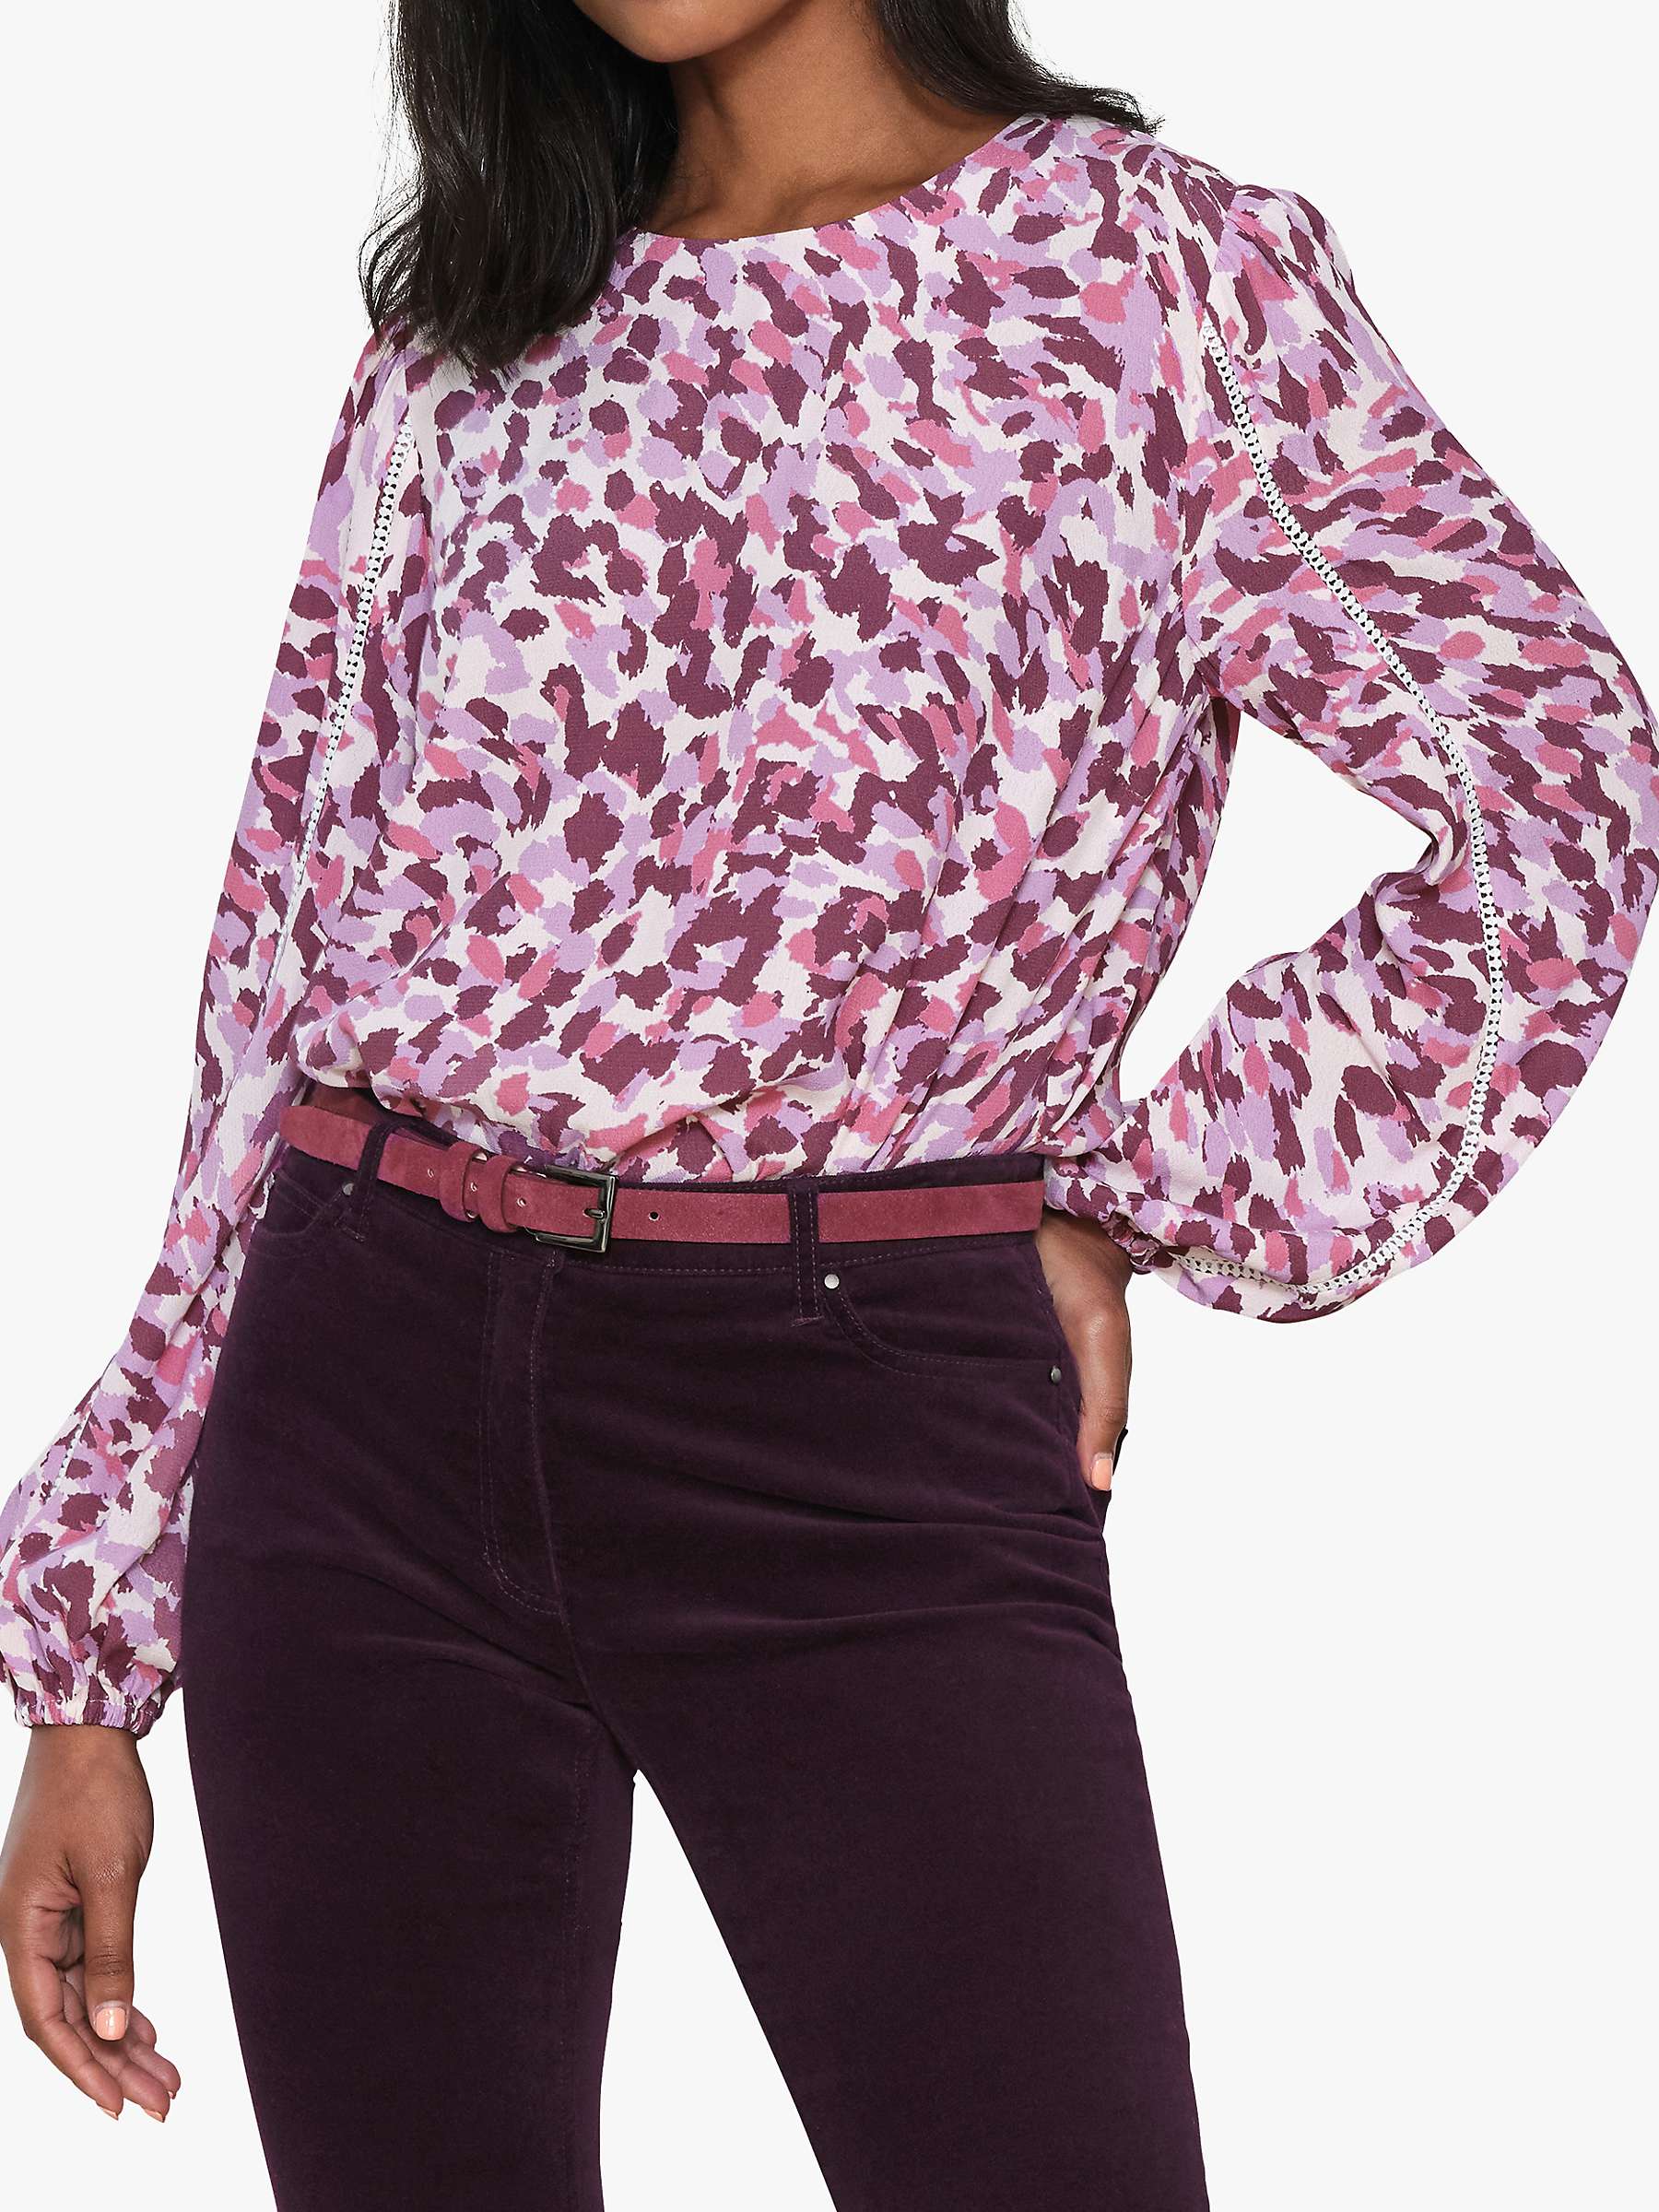 Buy Pure Collection Brush Stroke Print Top, Pink/Multi Online at johnlewis.com